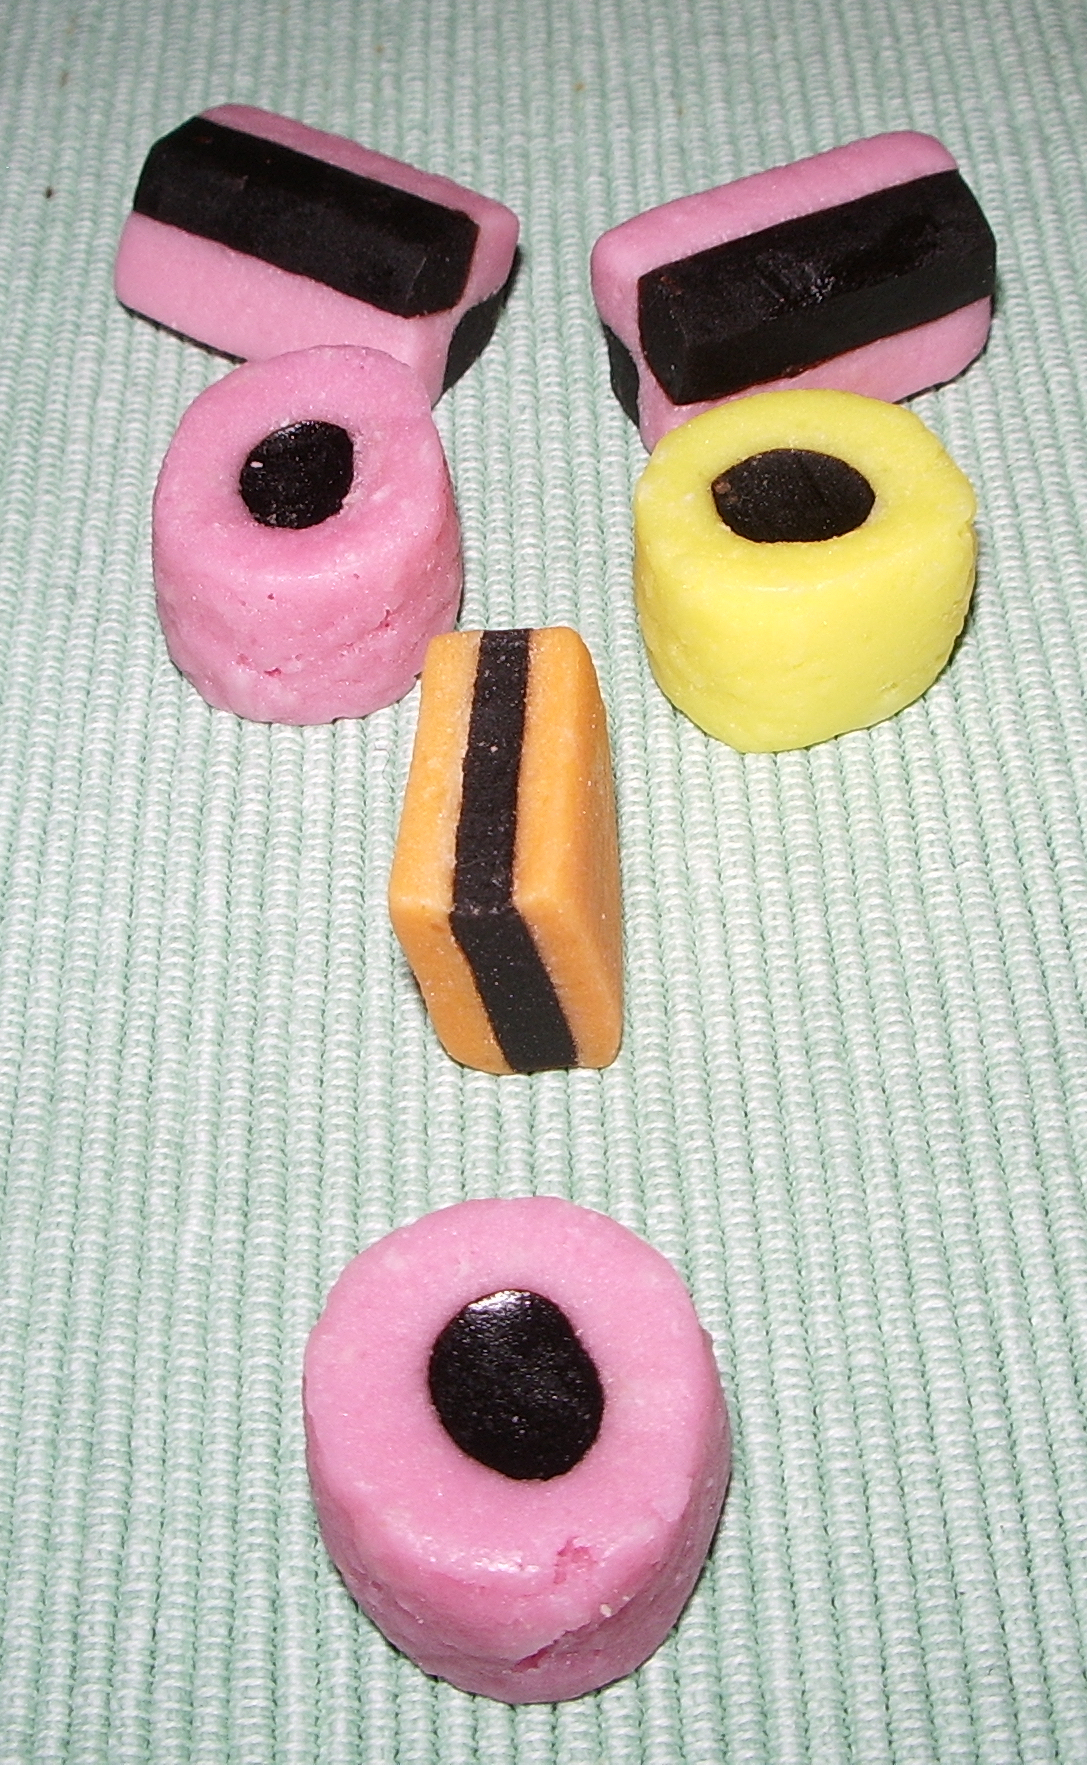 a variety of desserts arranged in the shape of a car